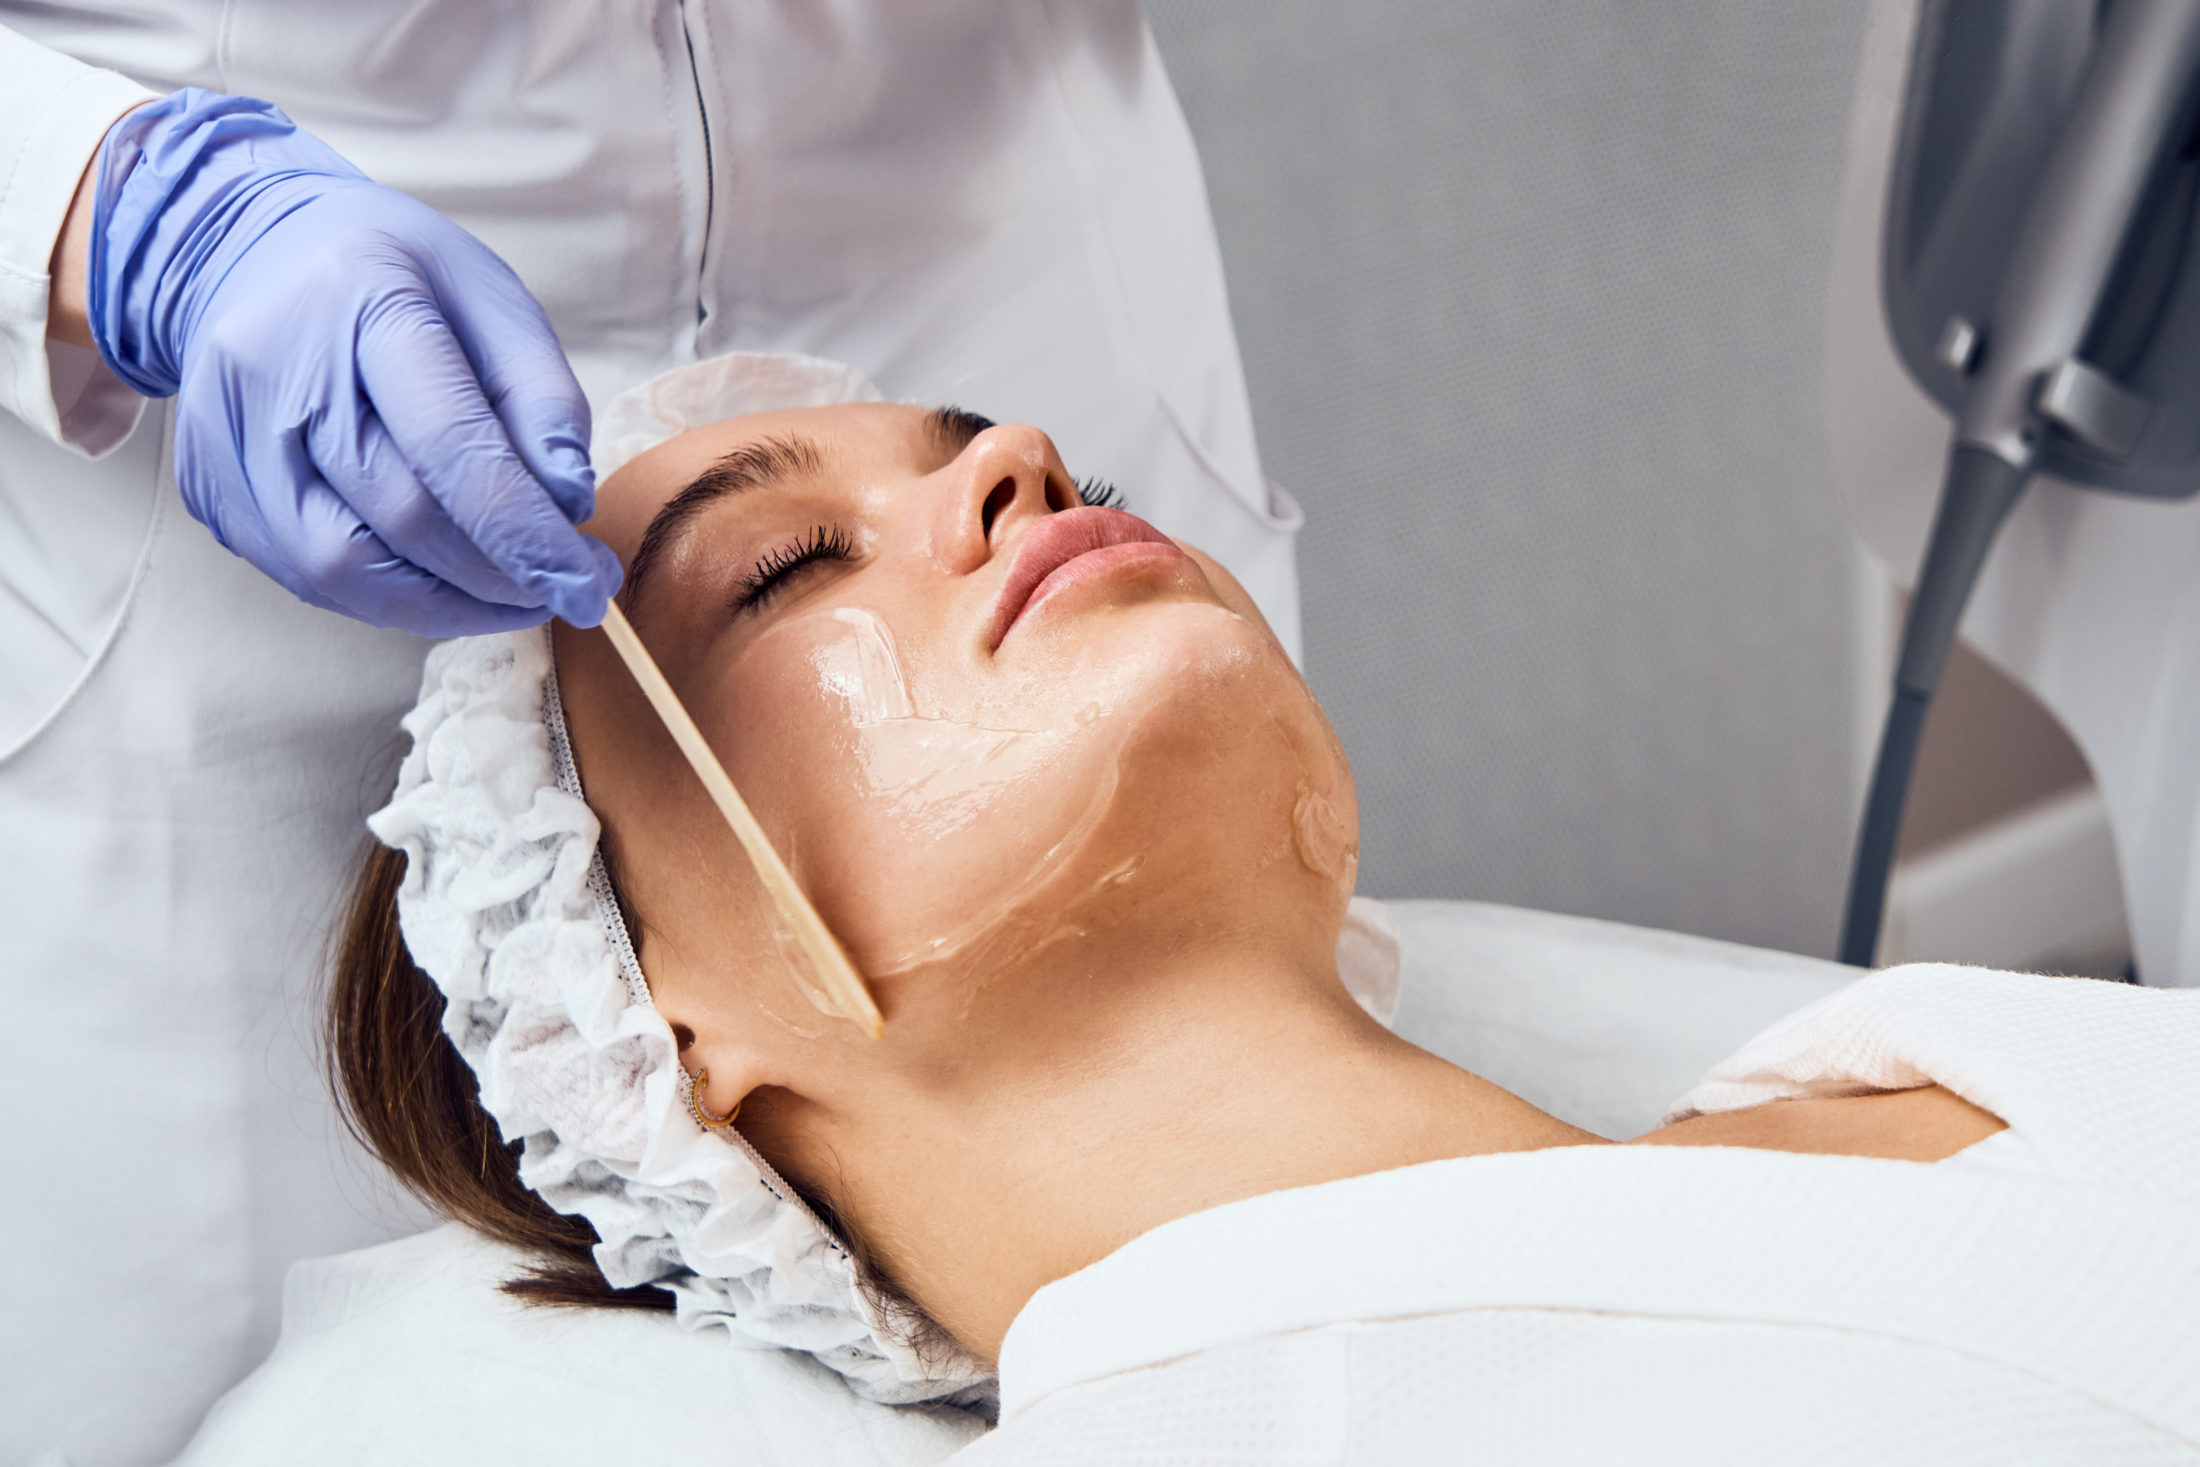 Female patient relaxed at medispa undergoing chemical peel application